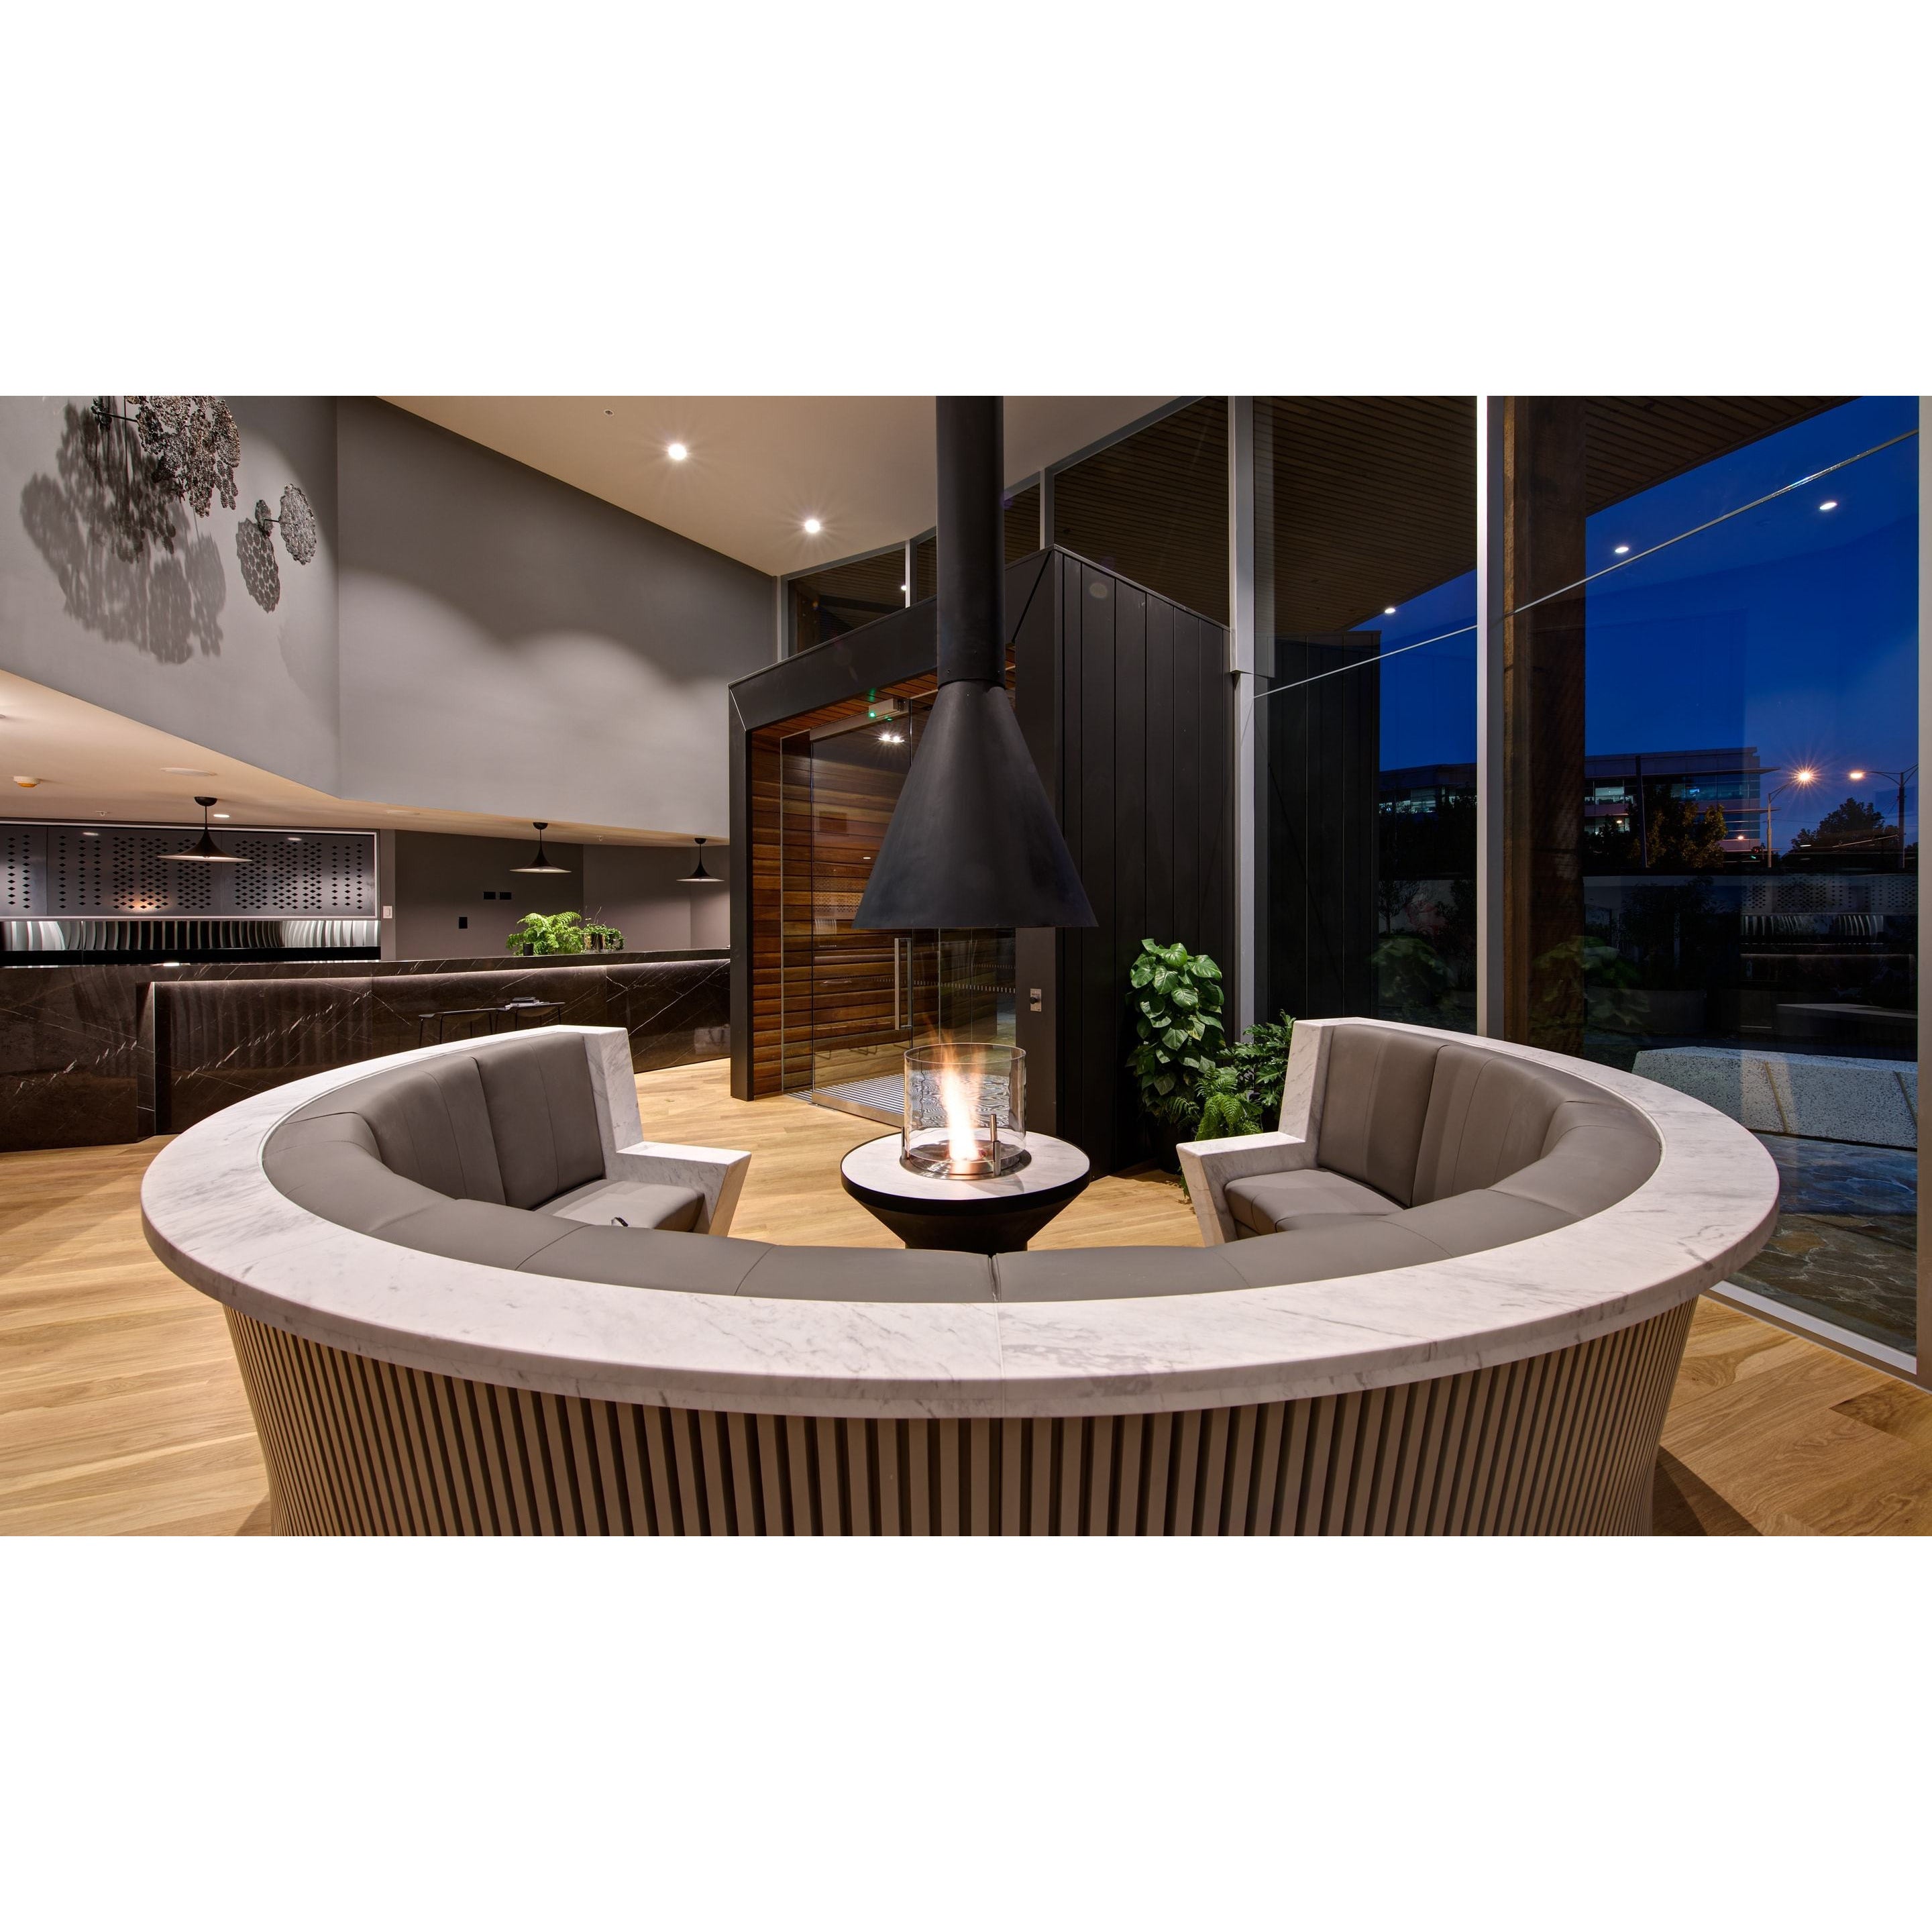 Small, compact and clean burning AB3 bio ethanol fireplace in stainless steel by EcoSmart Fire for sale. Create your own bespoke fireplace or redesign an old fireplace 